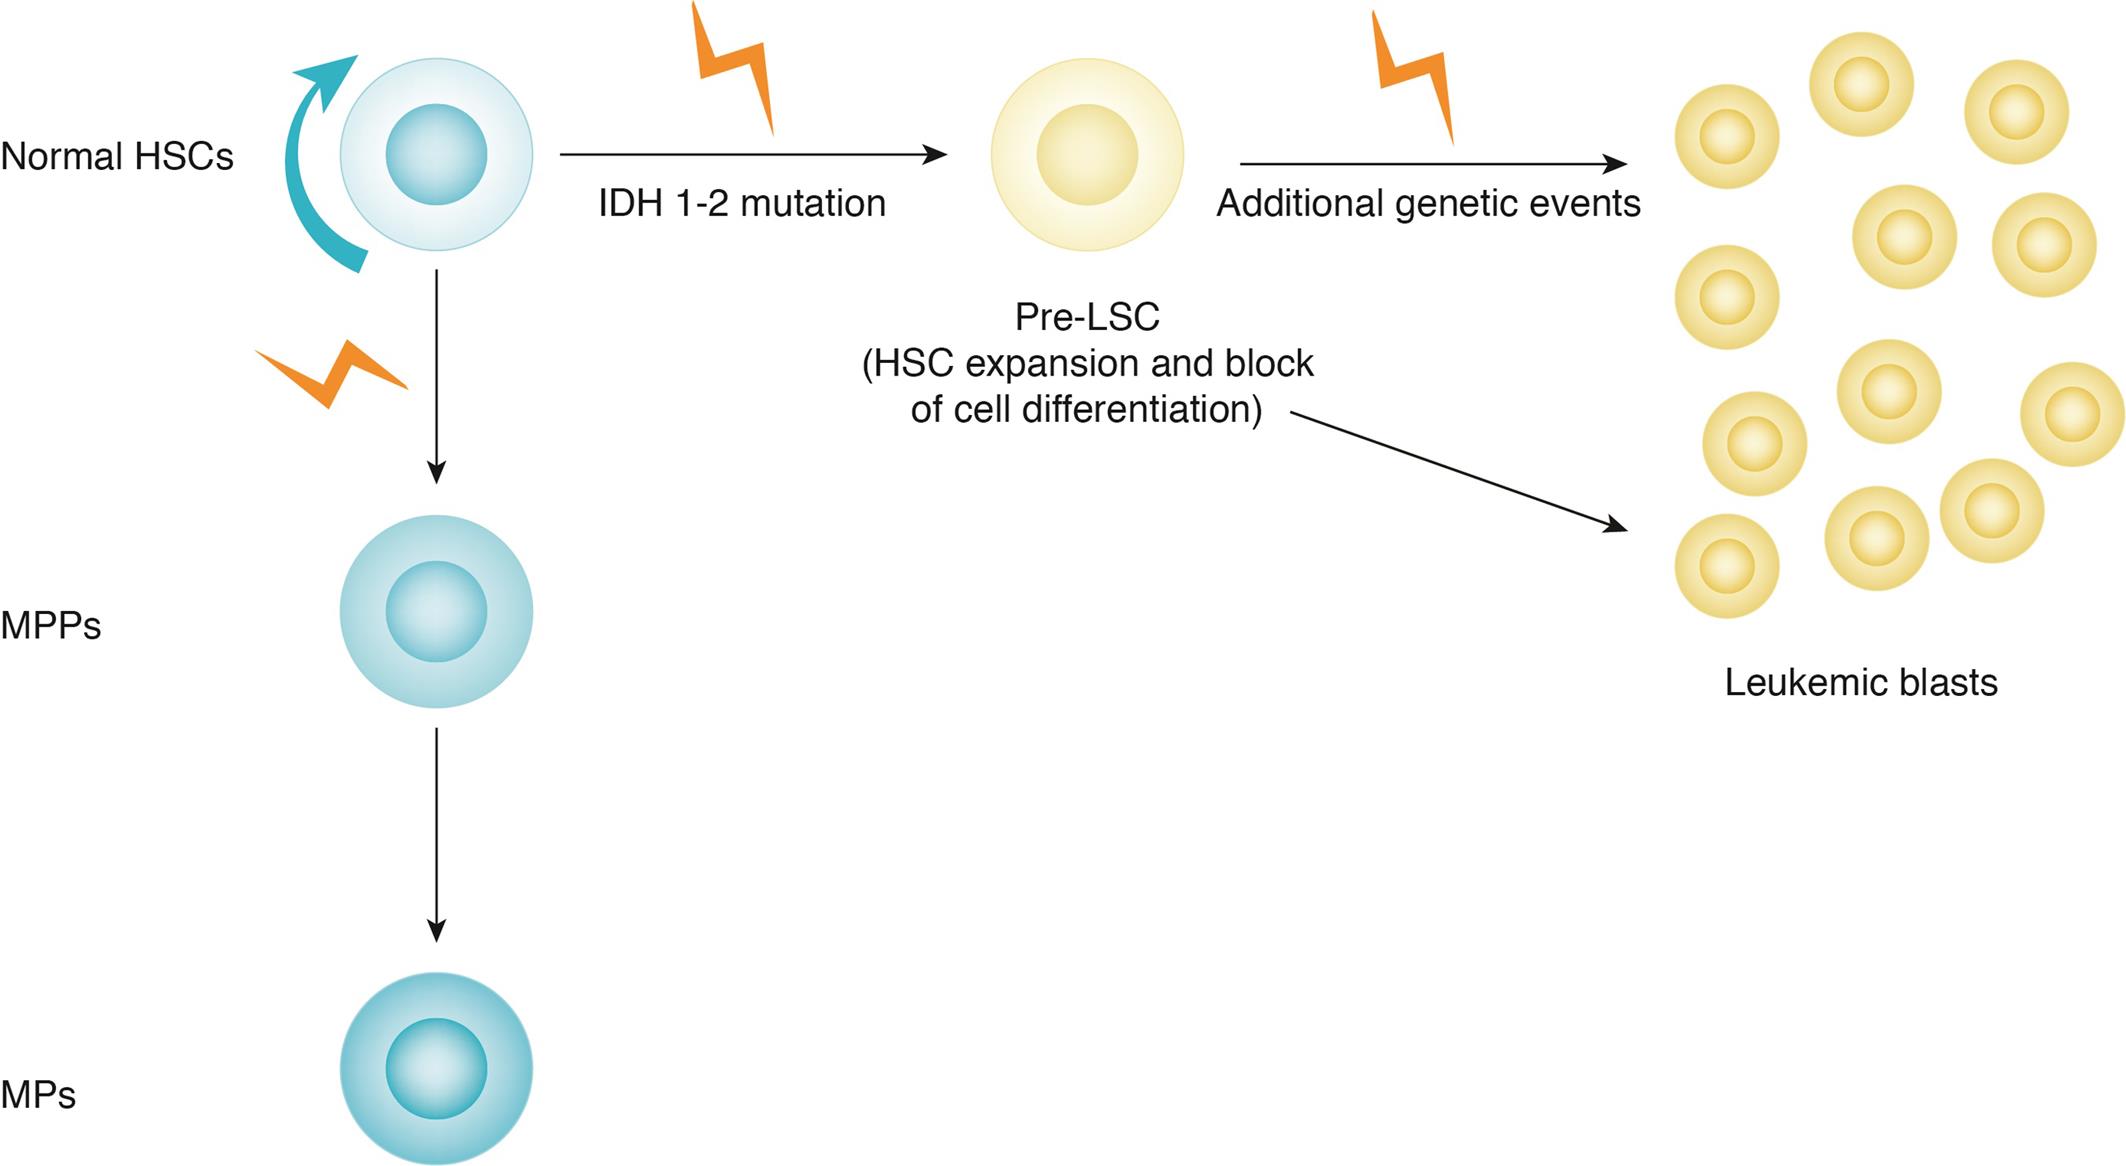 Schematic model for the acquisition of IDH1/2 mutations during leukemic development.